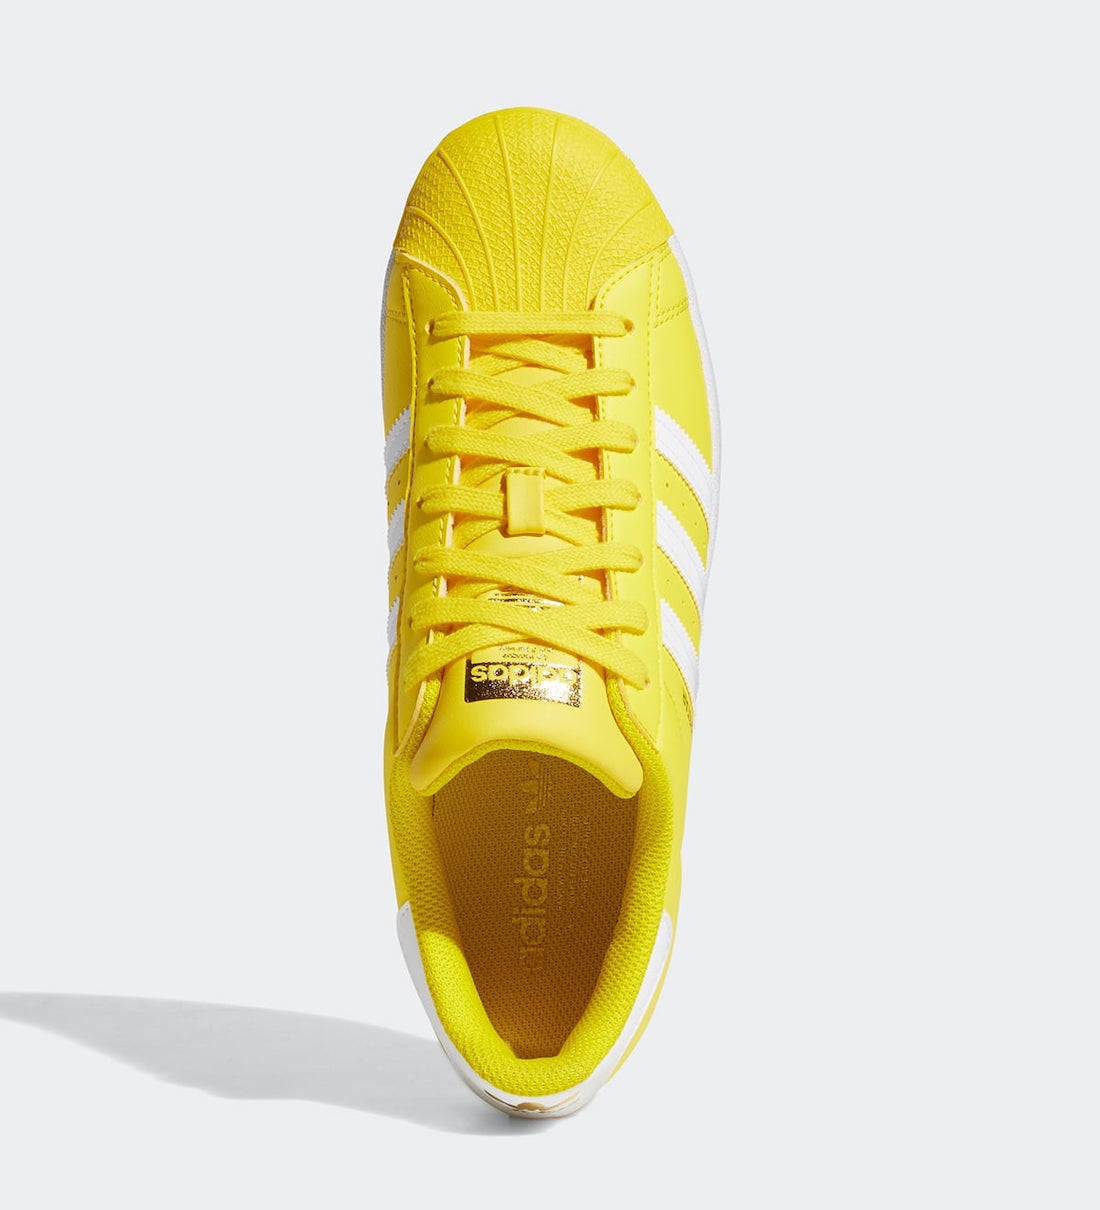 adidas Superstar Yellow White Gold GY5795 Release Date Info